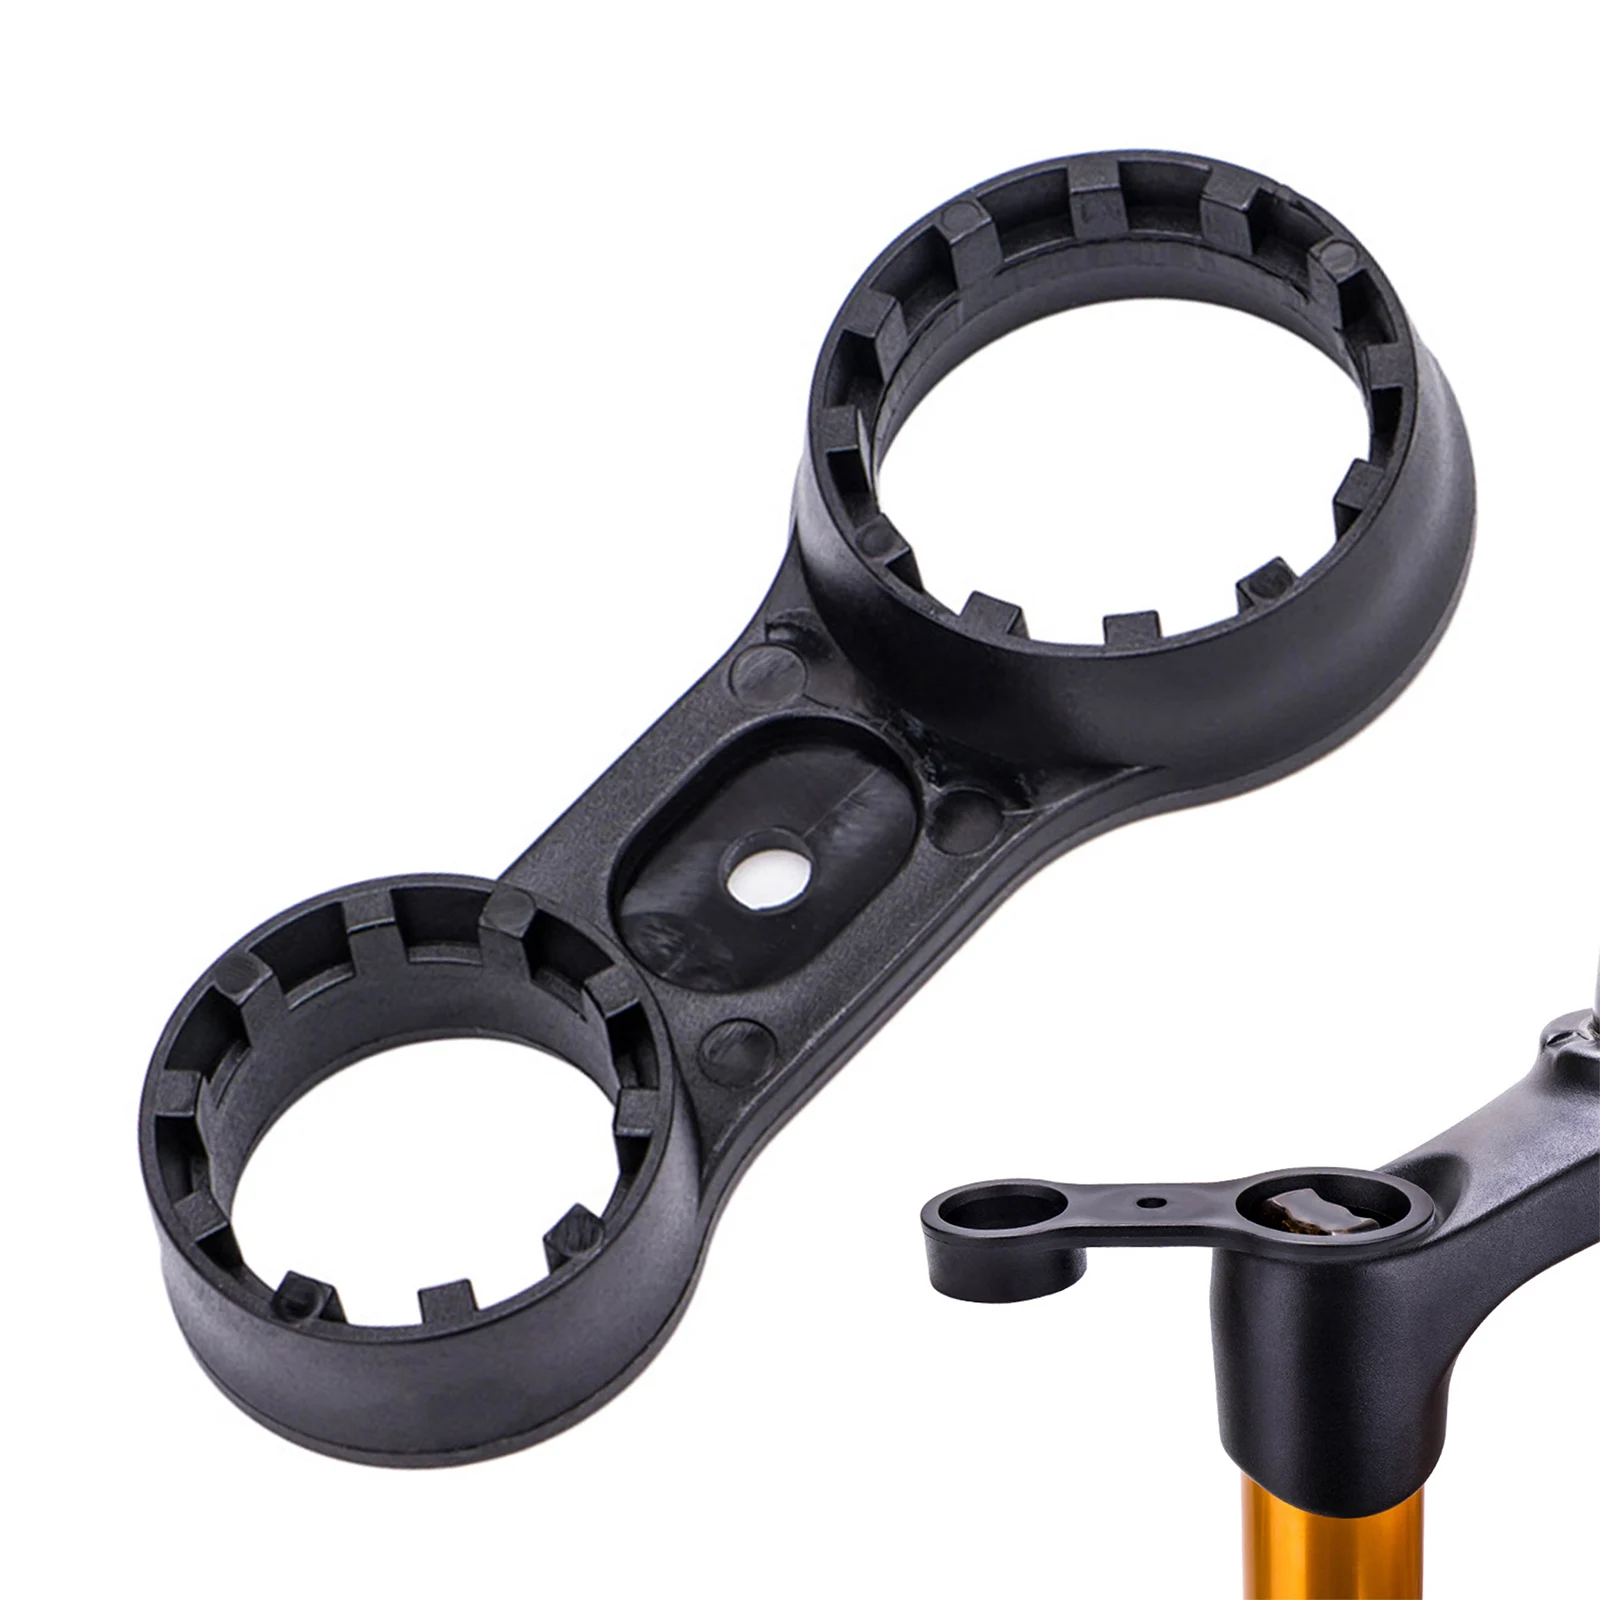 

MTB Bicycle Front Fork Cap Wrench Spanner For SR Suntour XCR/XCT/XCM/RST ABS Disassembly Tools Cycling Repair Tool